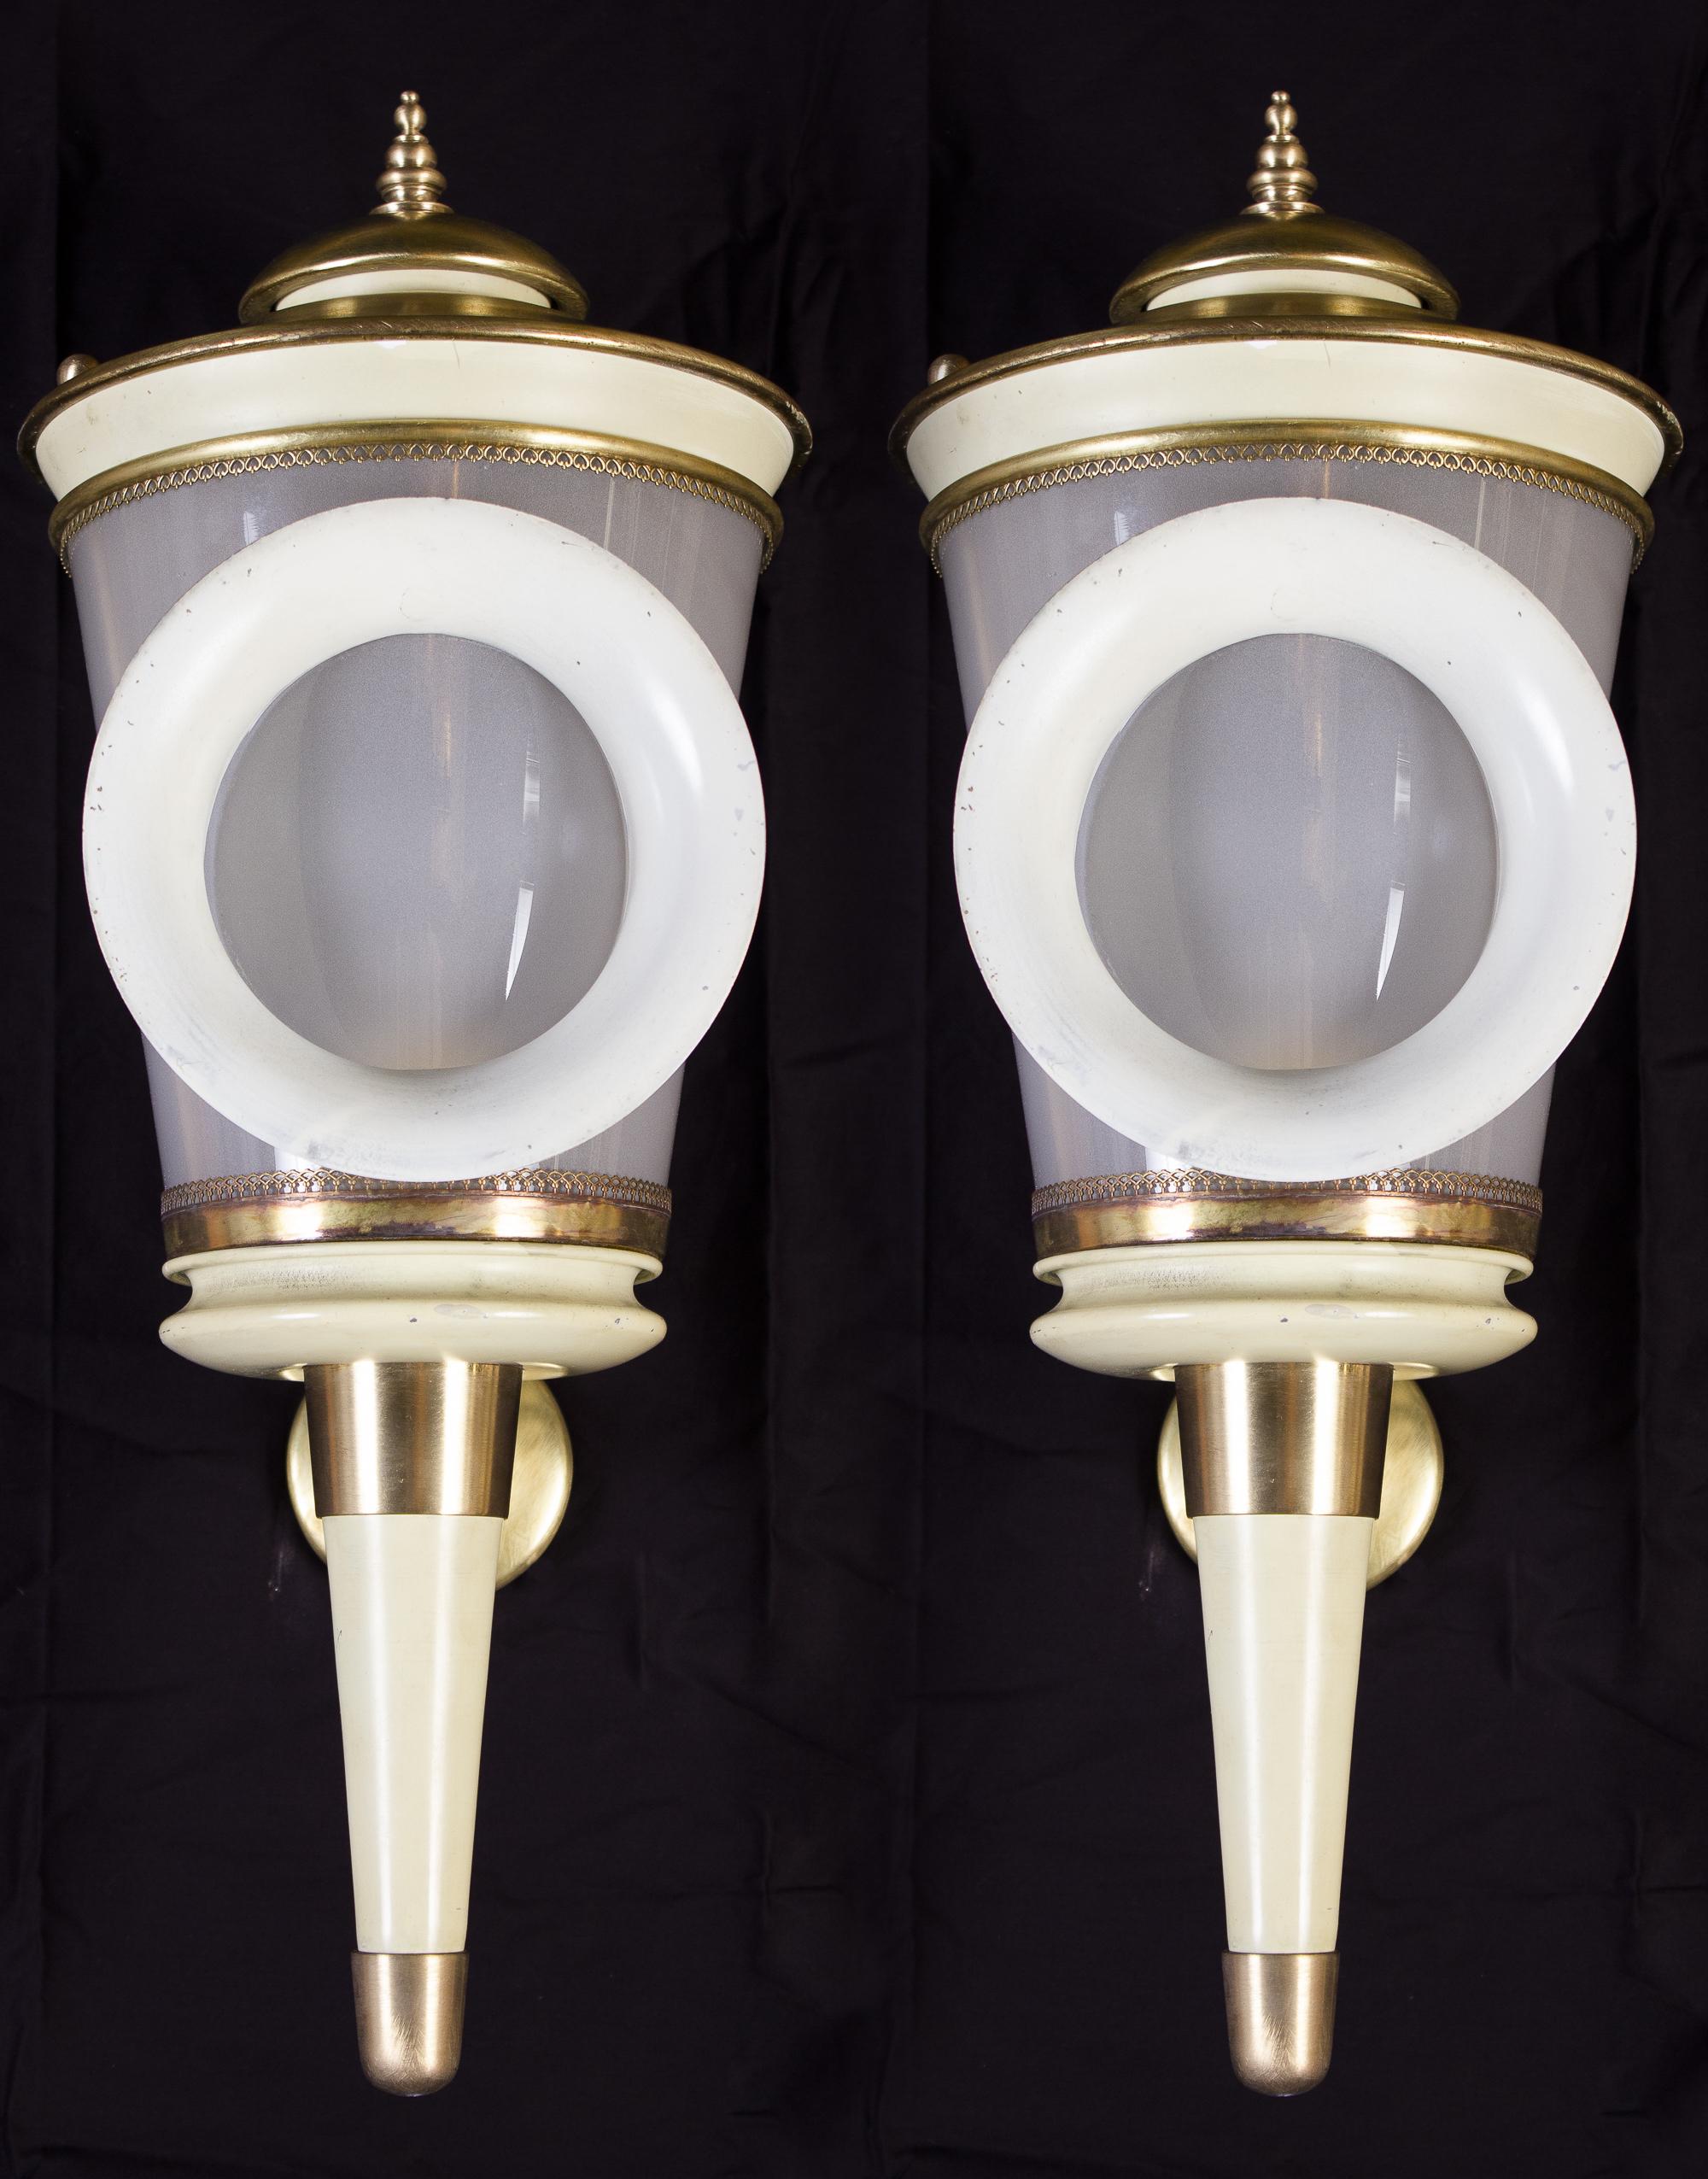 Pair of Ivory Painted and Brass Sconces or Wall Lights Carlo Scarpa Style, 1940 For Sale 4